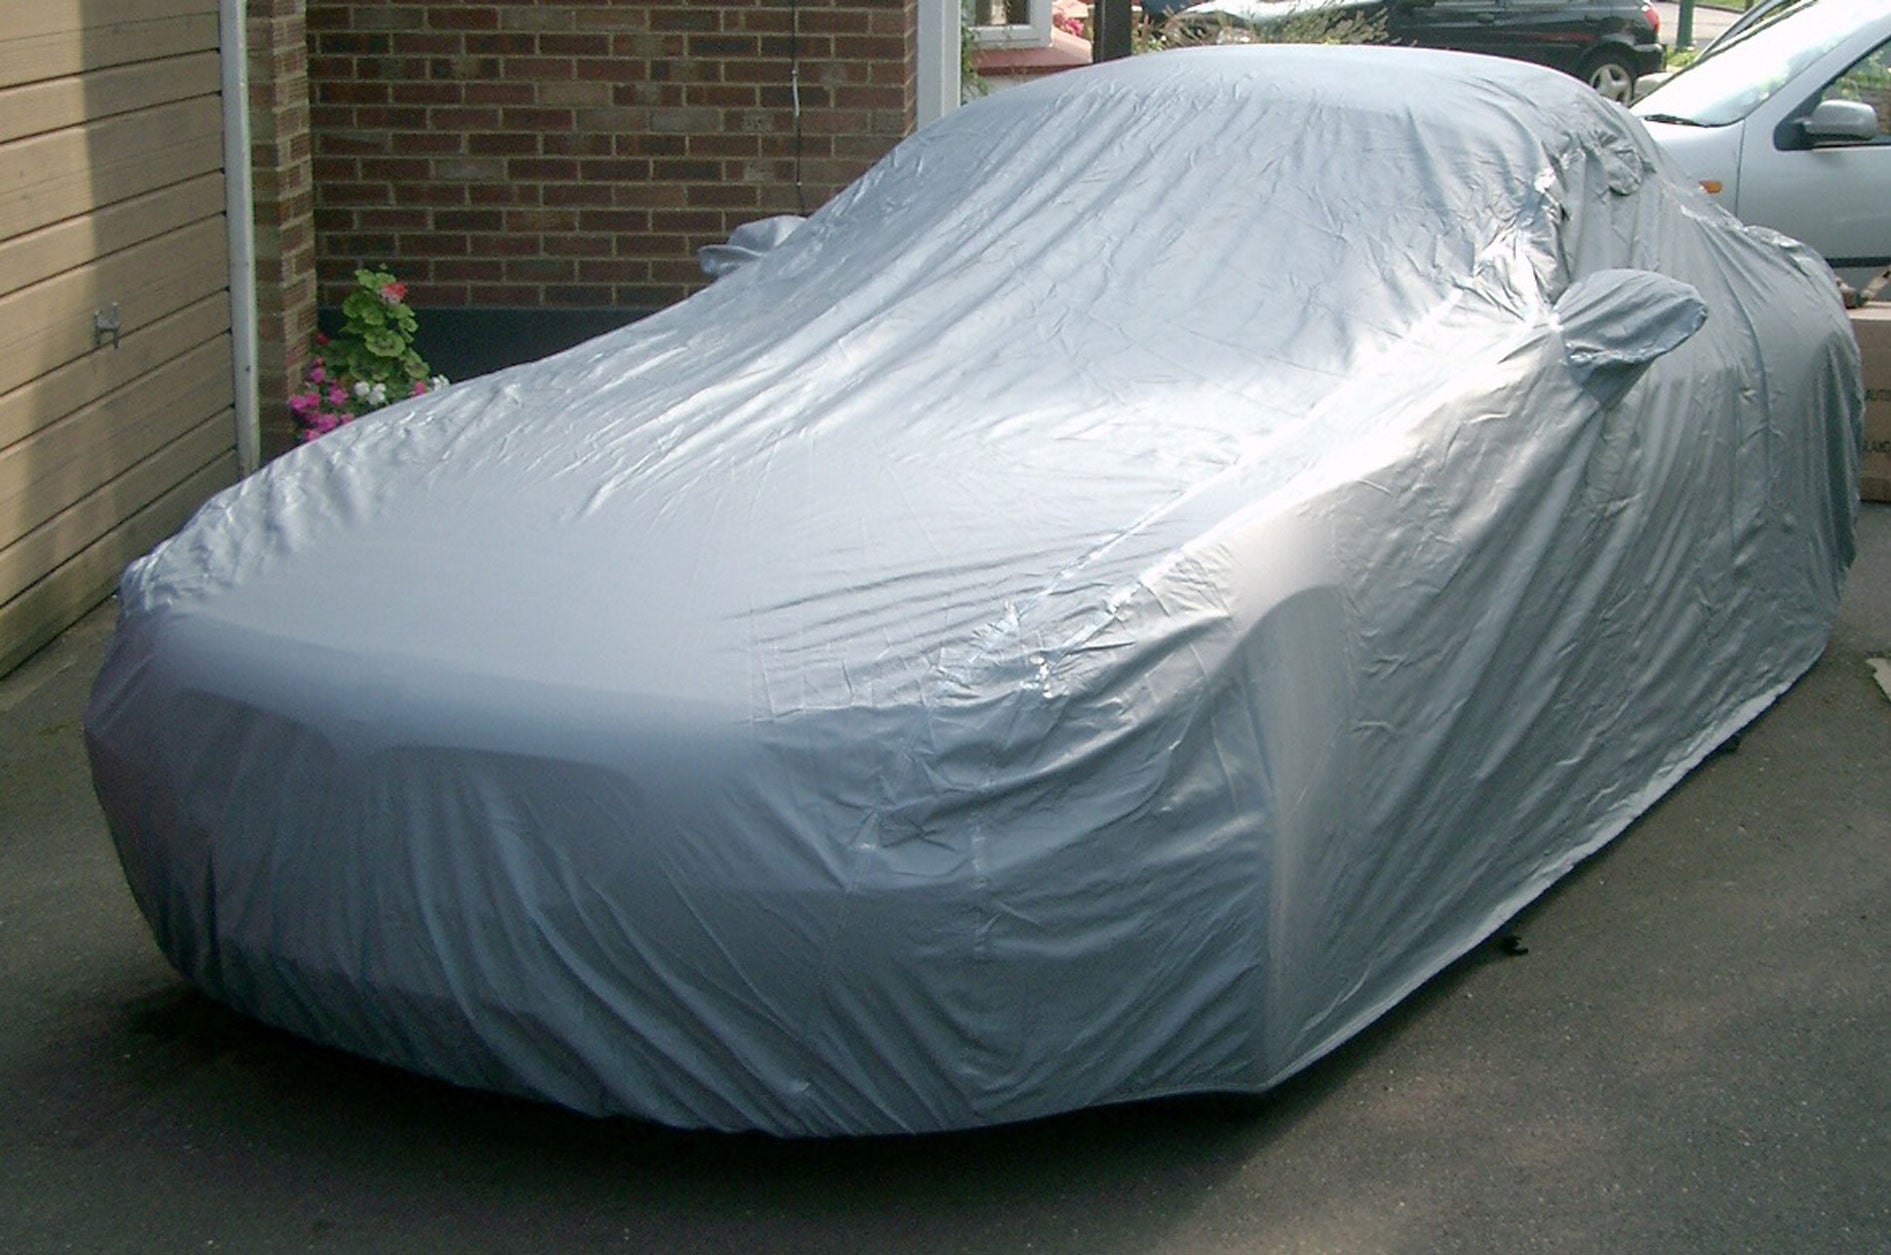 Monsoon outdoor waterproof winter car covers for TVR - Storm Car Covers